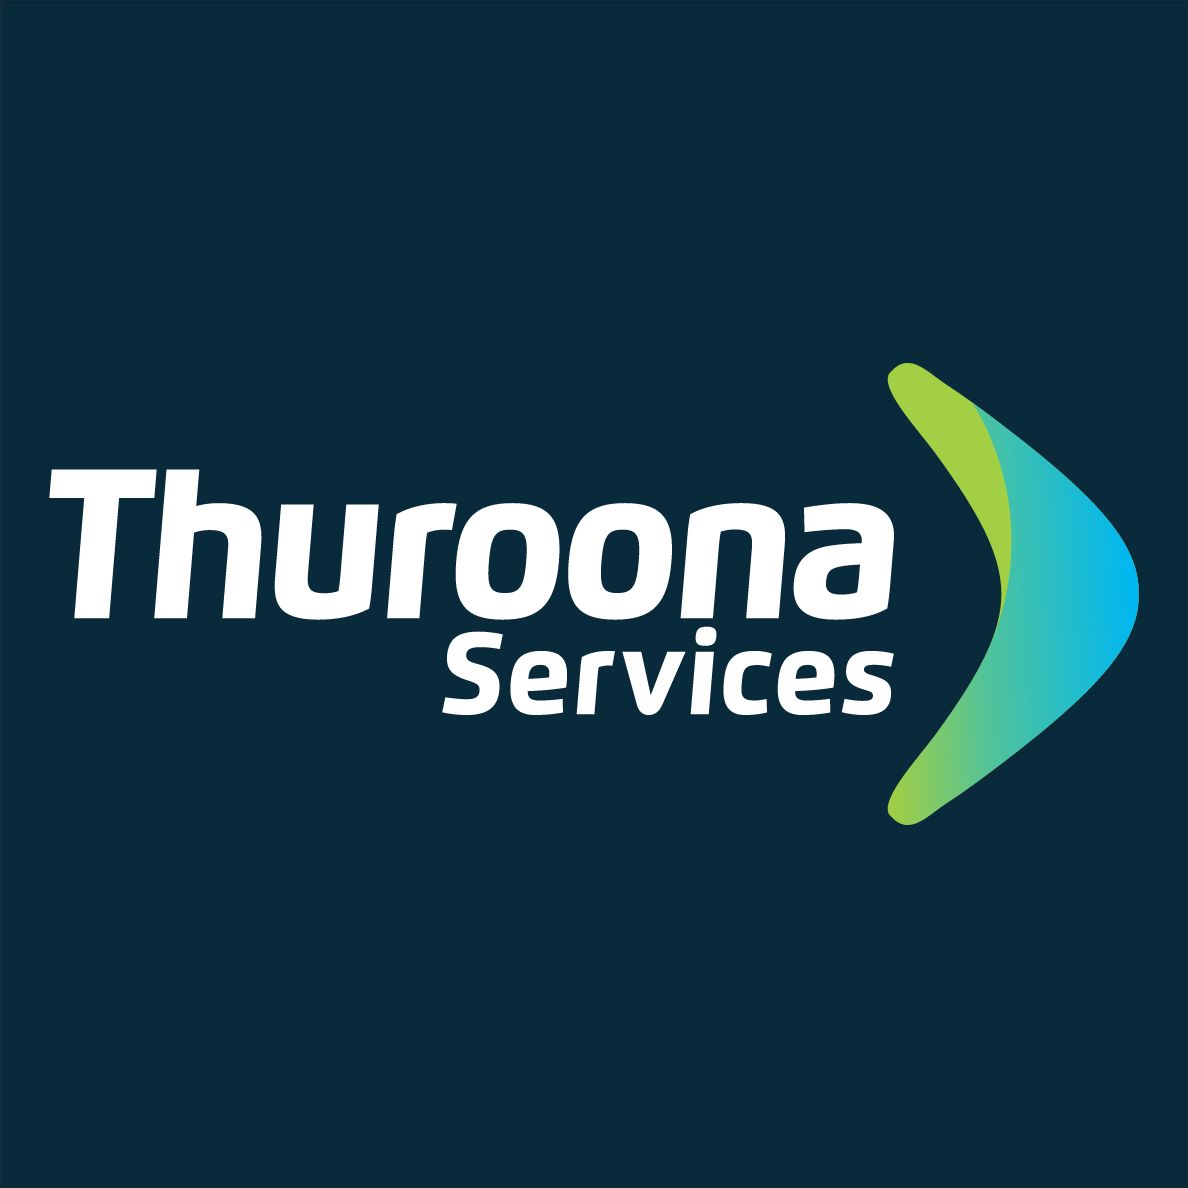 Thuroona Services